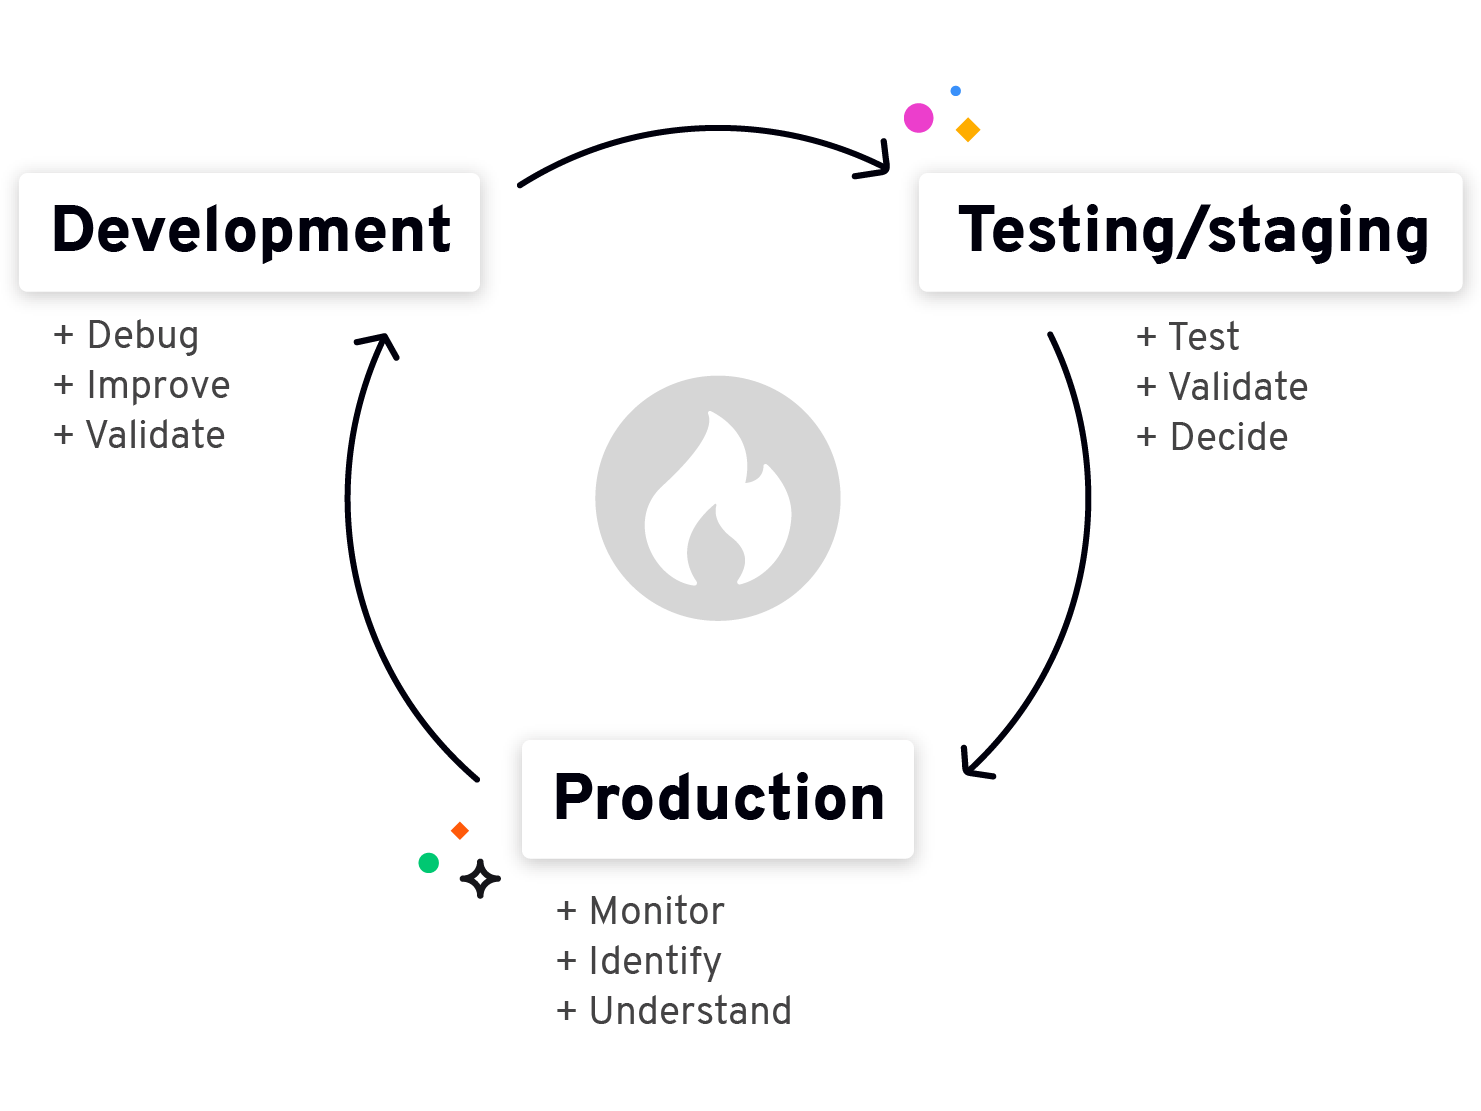 Illustration of observability use cases across the development lifecycle.